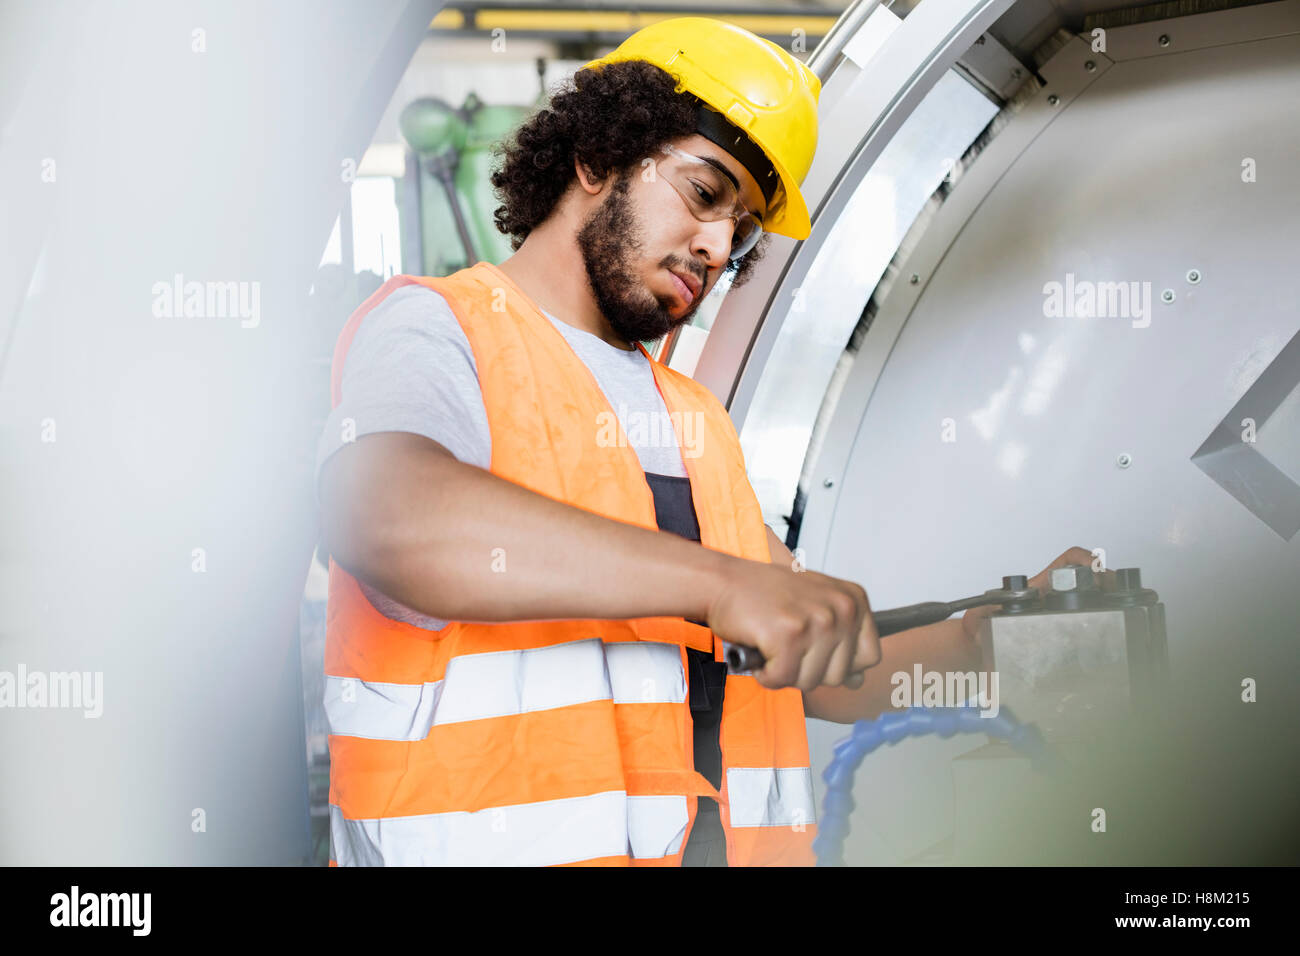 Young manual worker tightening bolts on machinery in factory Stock Photo